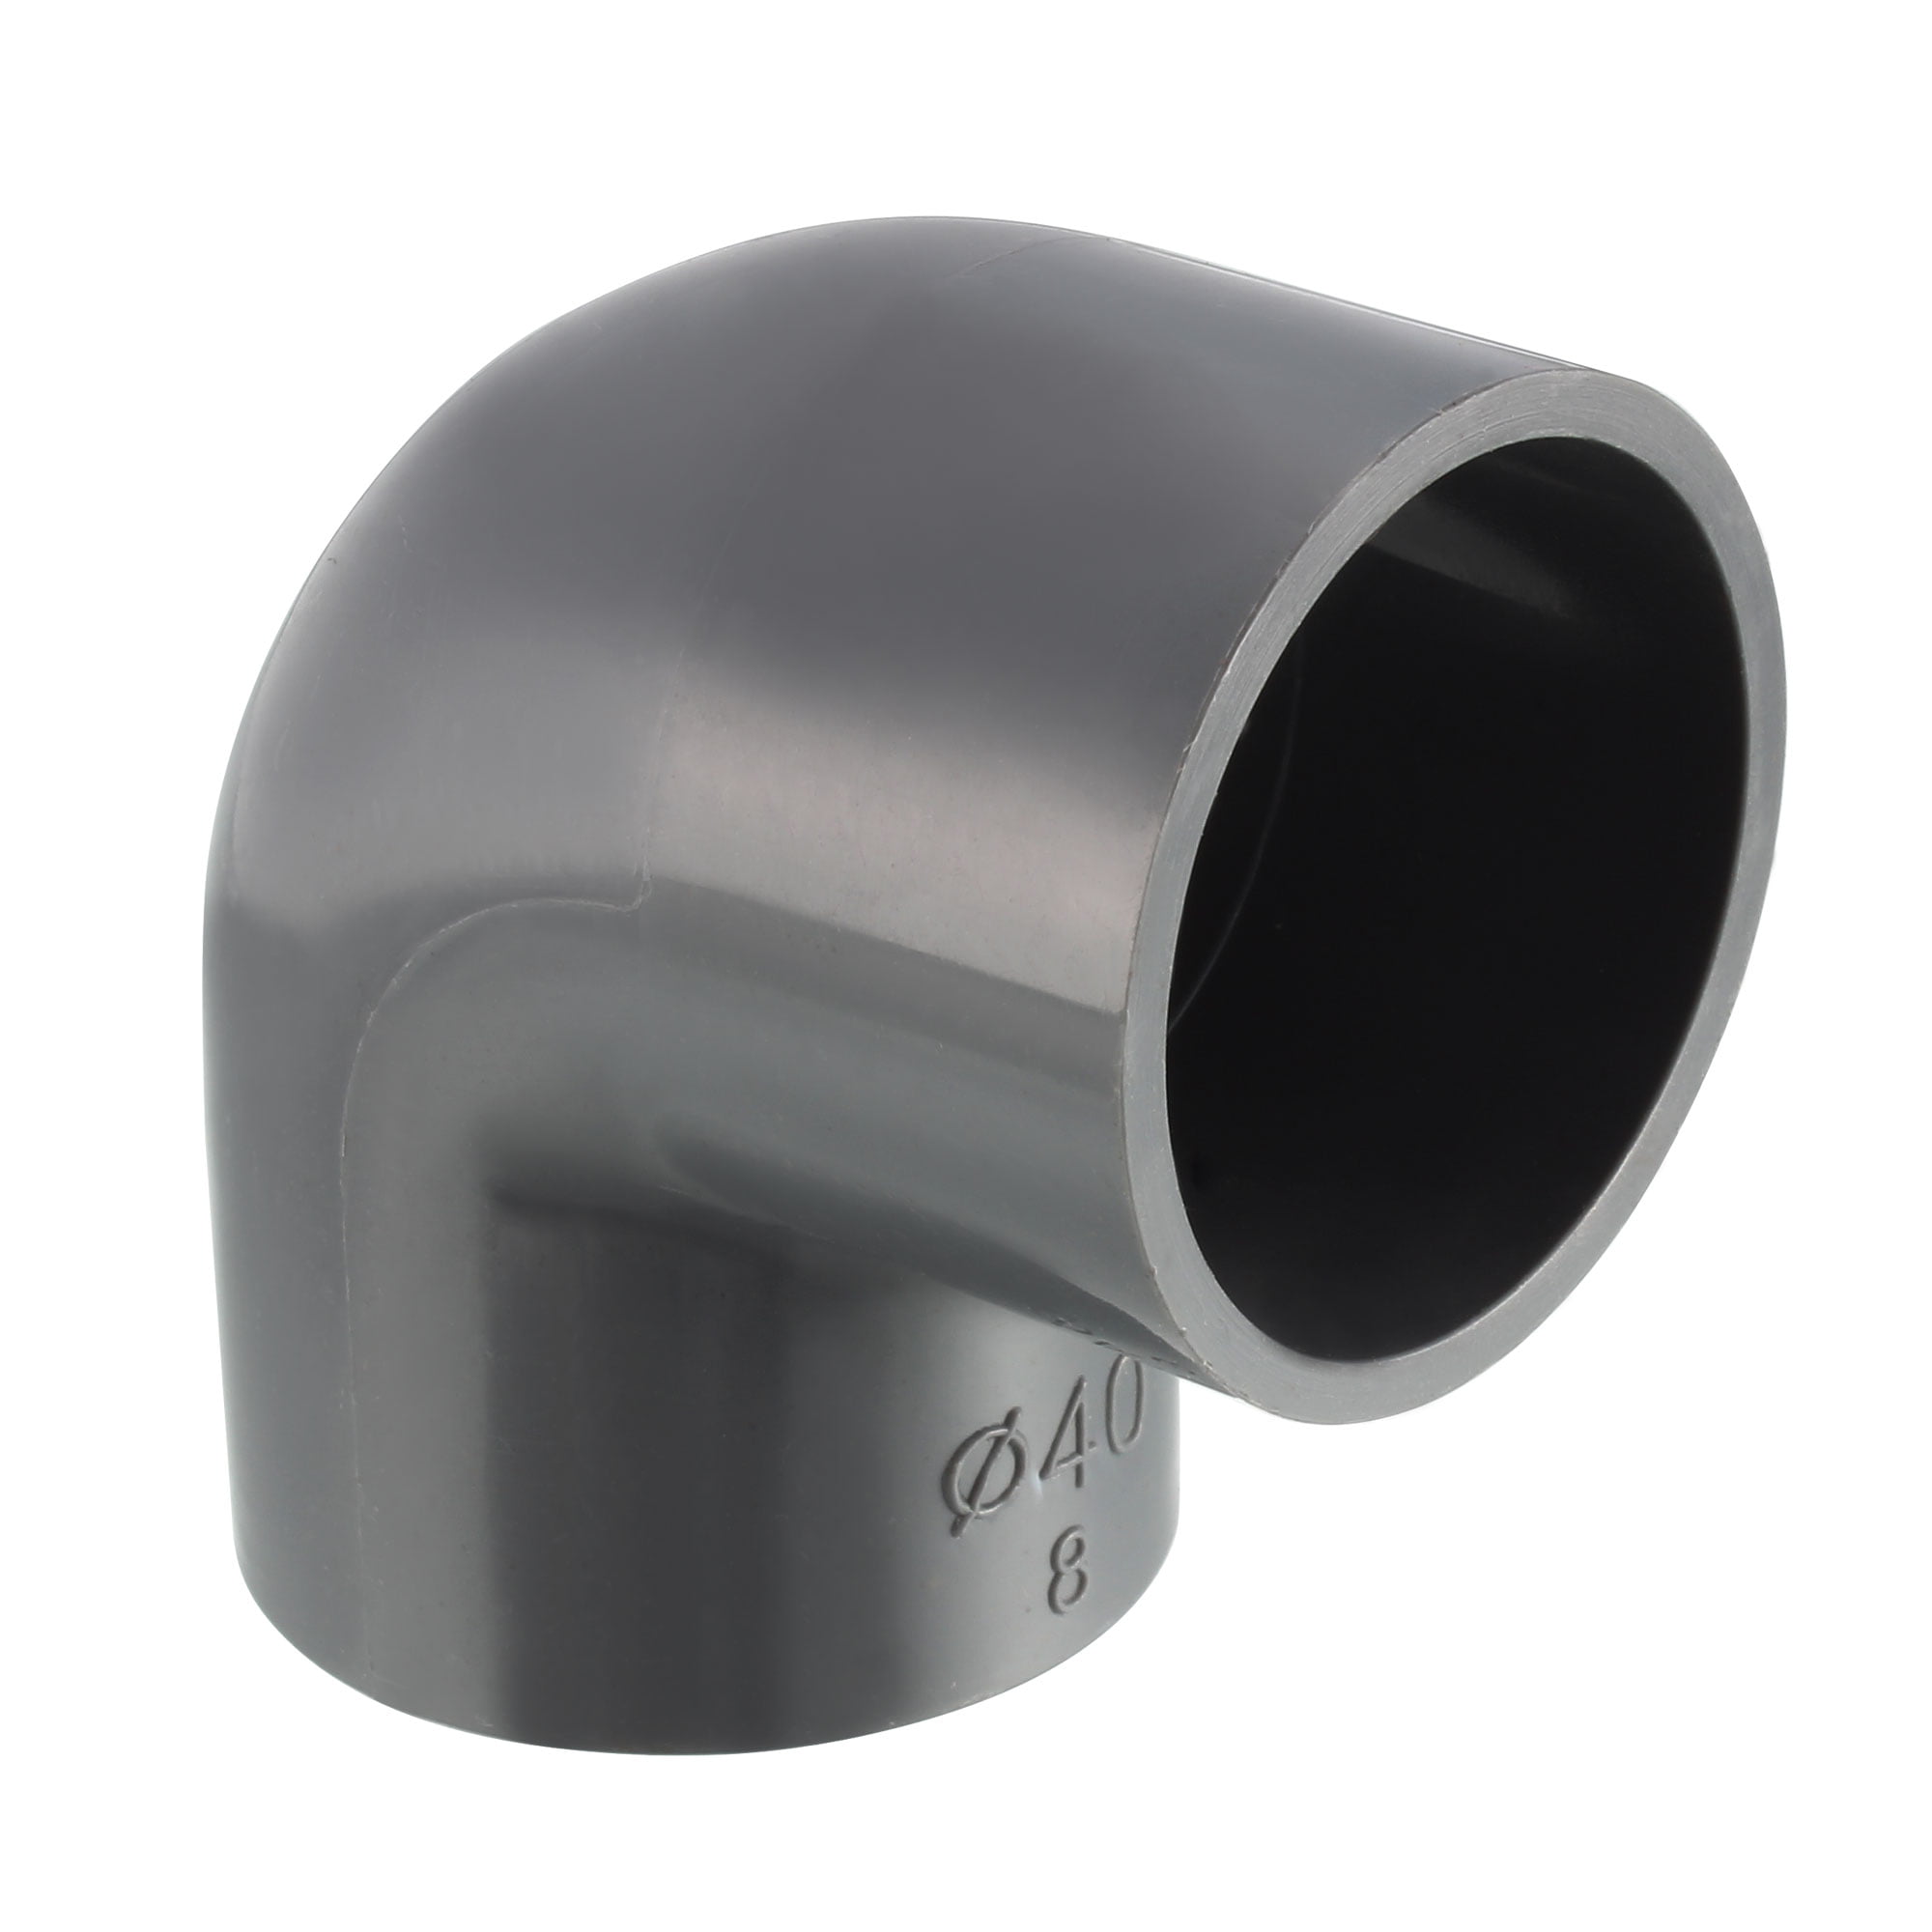 PVC Pipe Fitting 40mm Slip Socket 90 Degree Elbow Coupling Connector